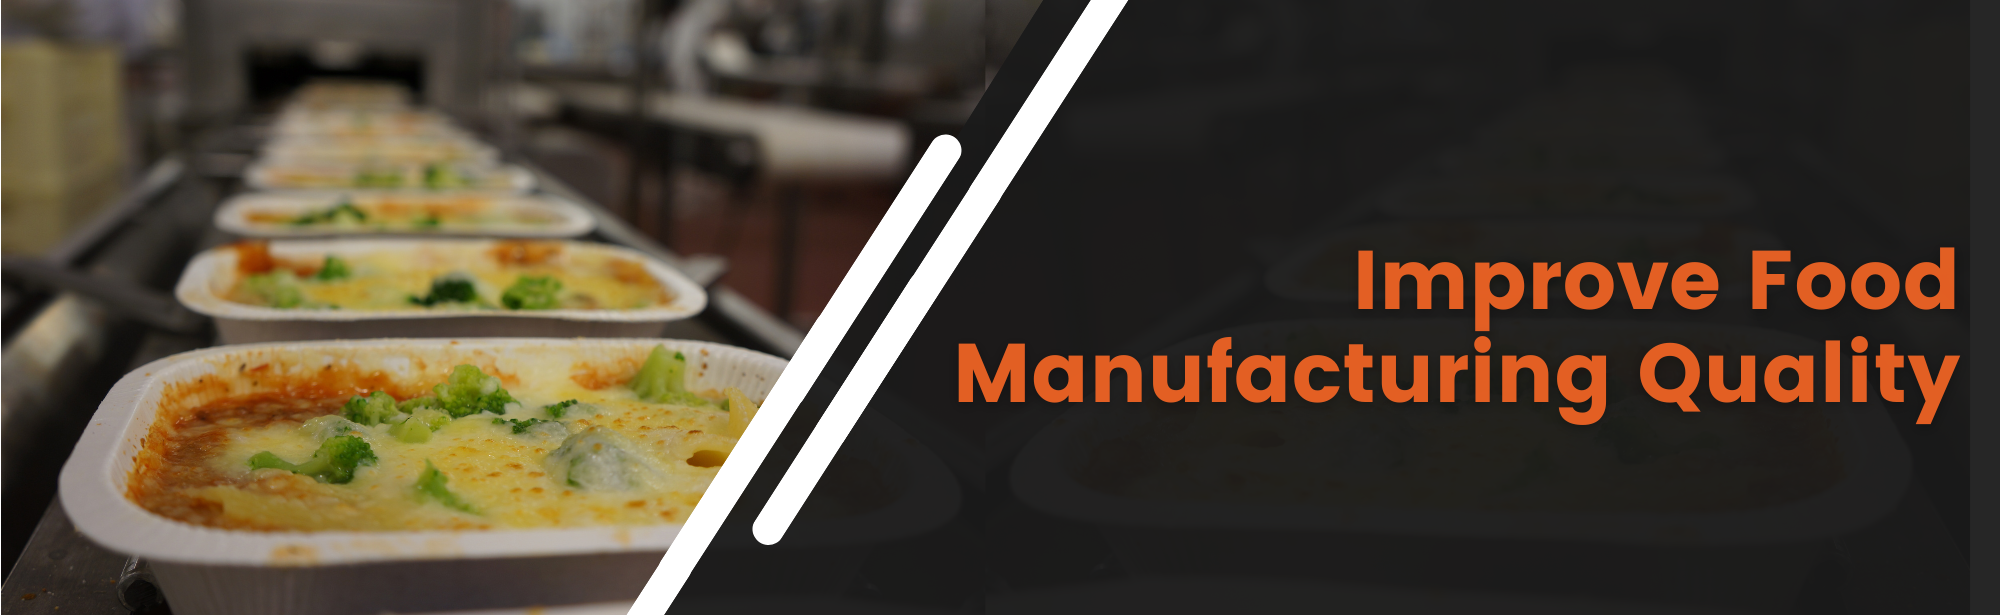 Improving Food Manufacturing Quality